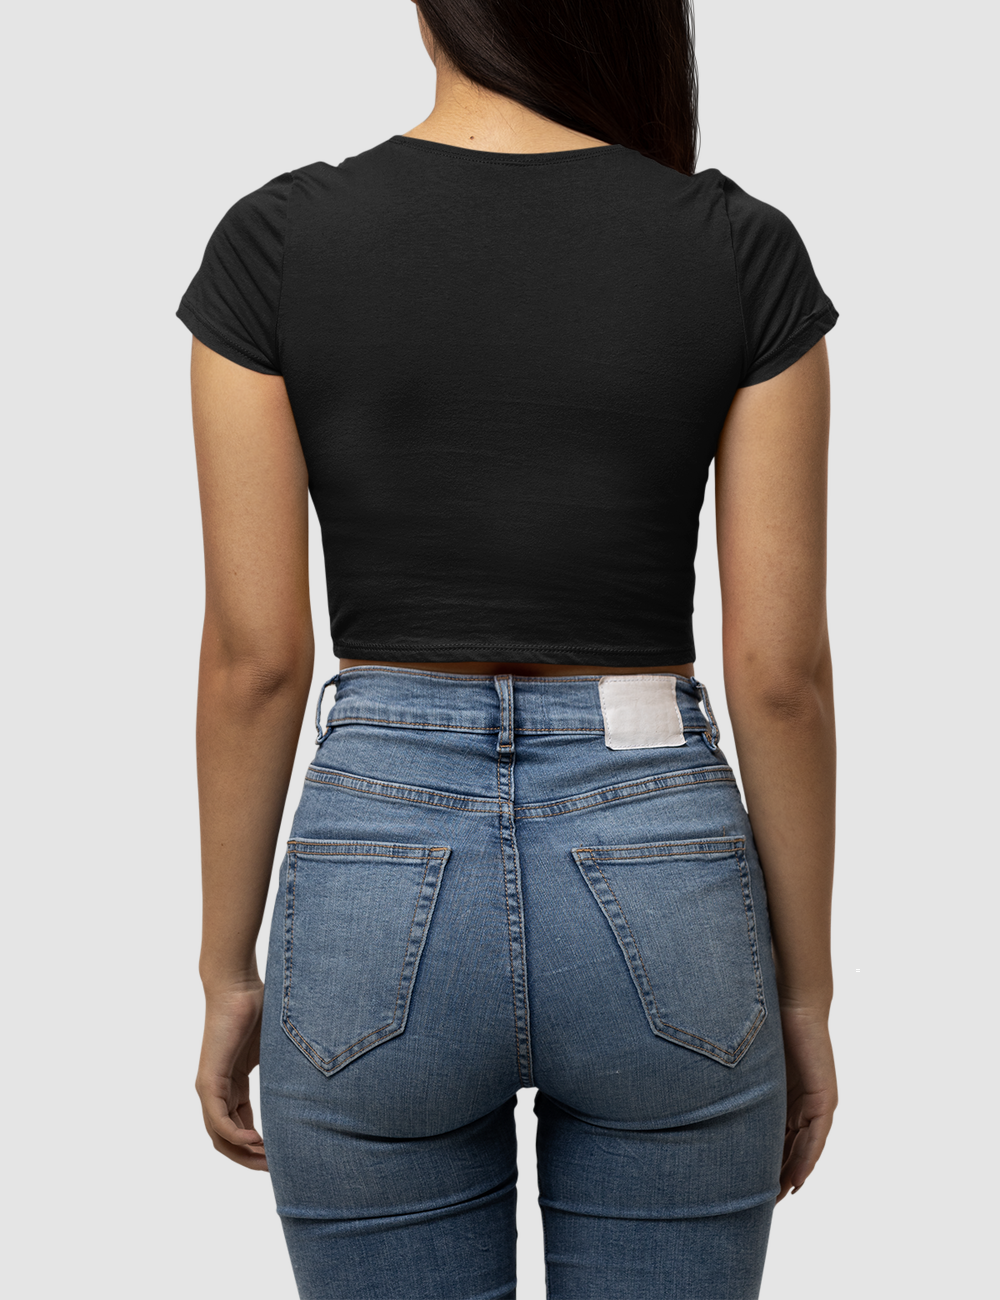 Don't Look Into Her Eyes | Women's Fitted Crop Top T-Shirt OniTakai